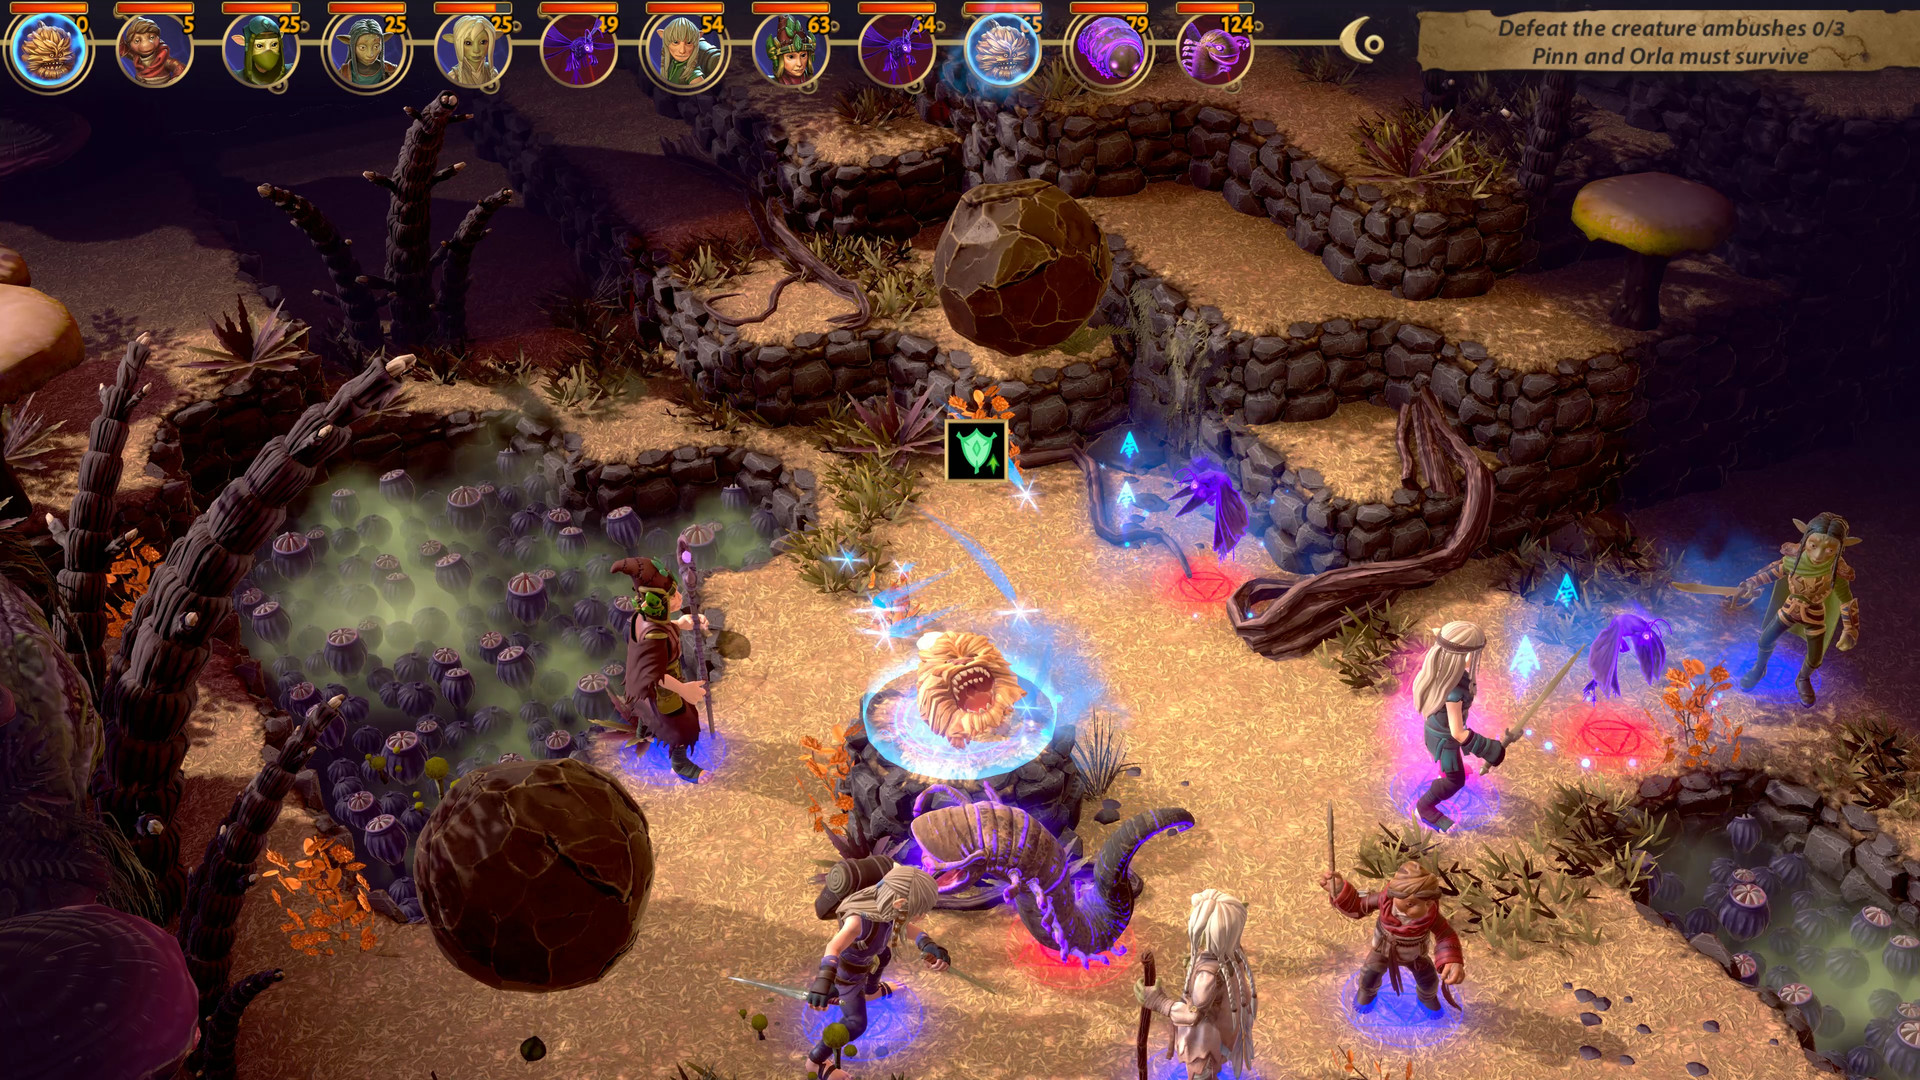 The Dark Crystal: Age of Resistance Tactics Free Download